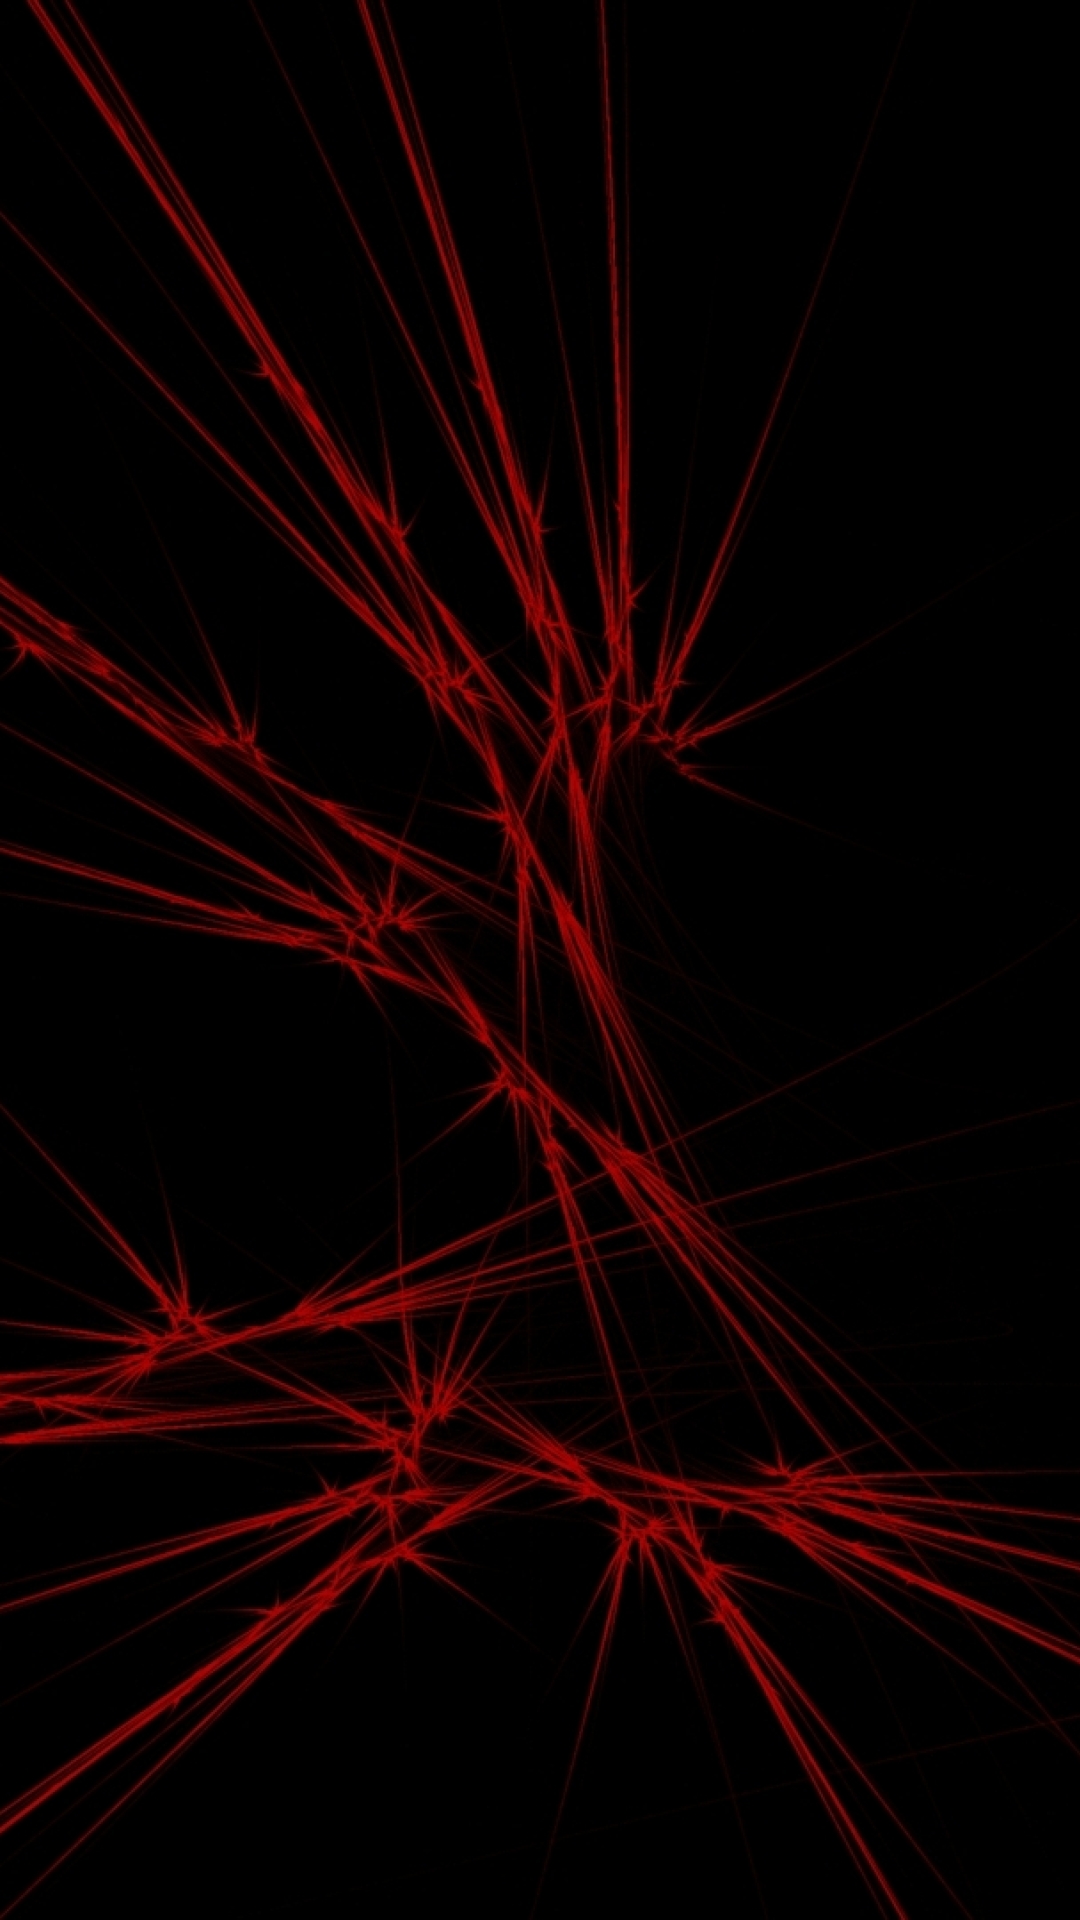 159765_adapted_1080x1920  Red and black wallpaper, Black